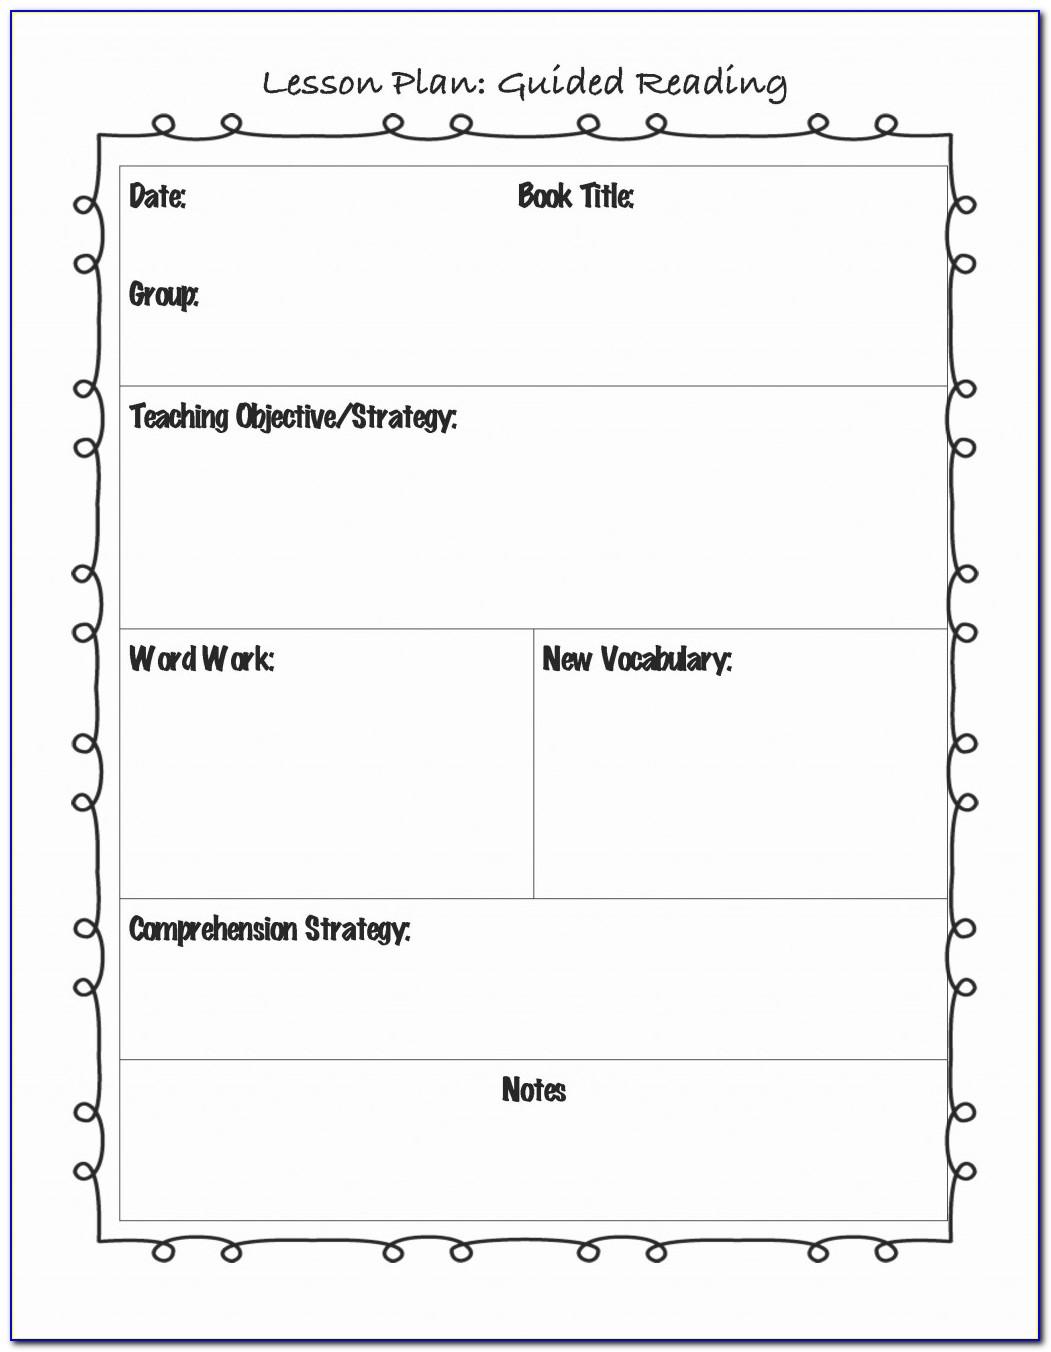 Tennessee Instructional Model Lesson Plan Template